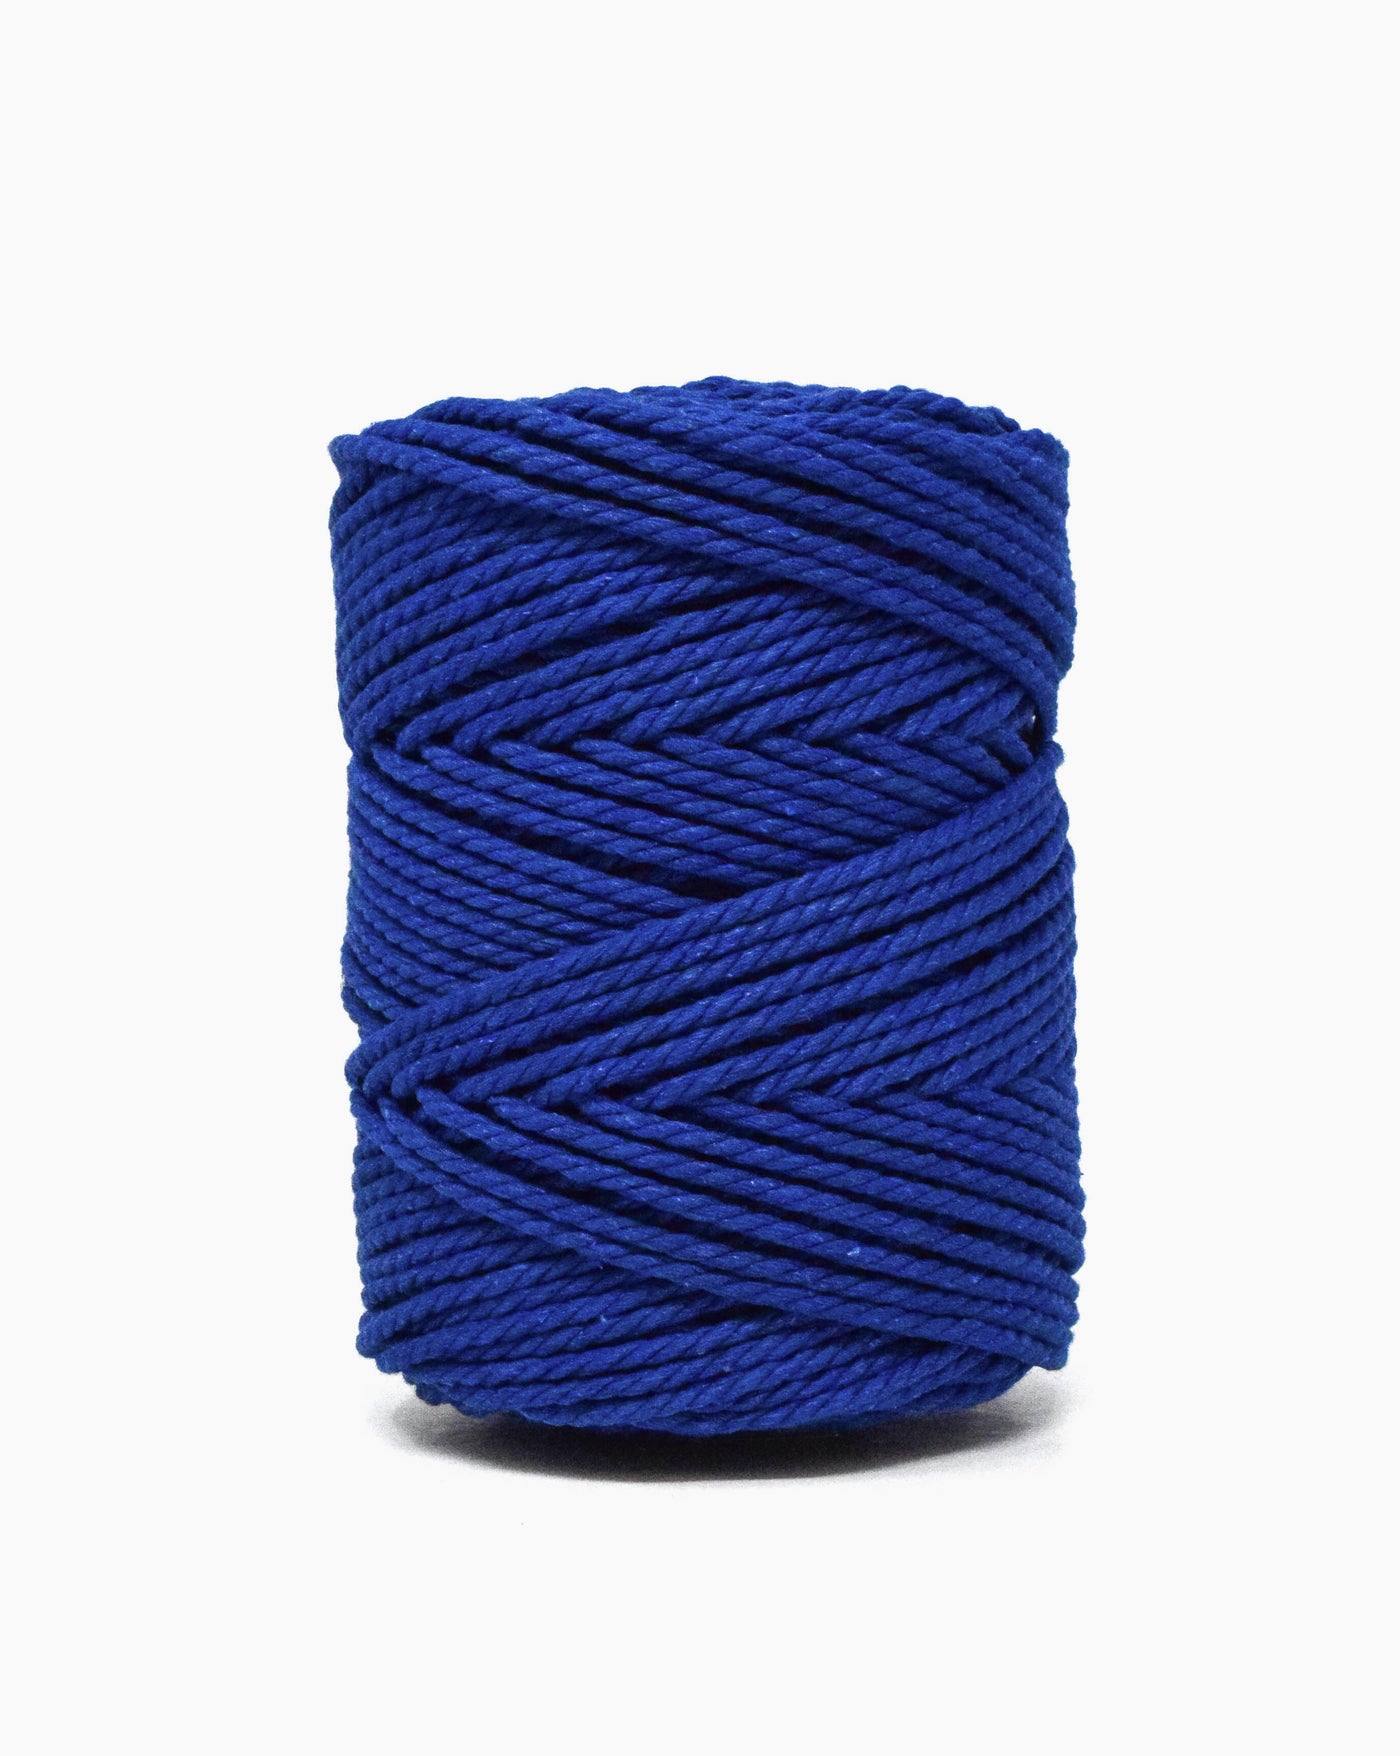 COTTON ROPE ZERO WASTE 3 MM - 3 PLY - BLUE LAGOON COLOR